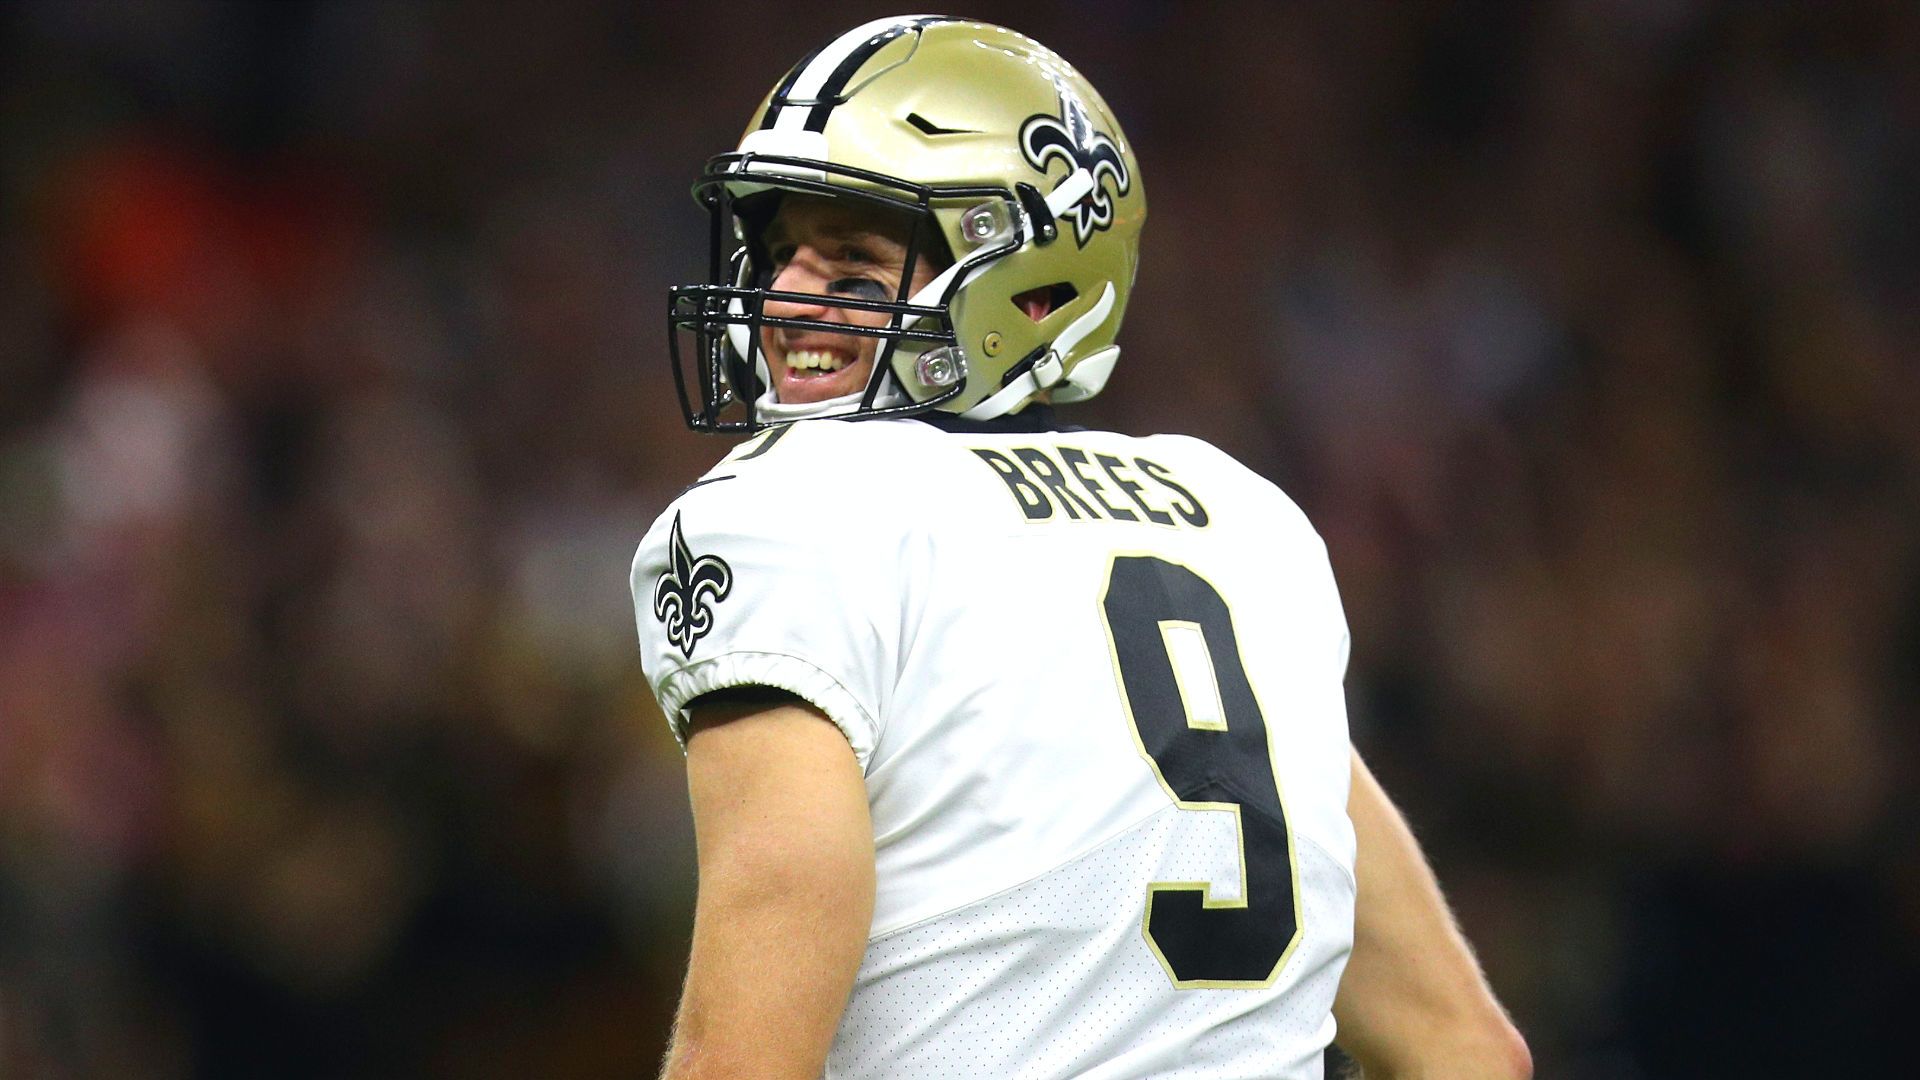 Let's go ahead and name Drew Brees MVP of the 2018 NFL season